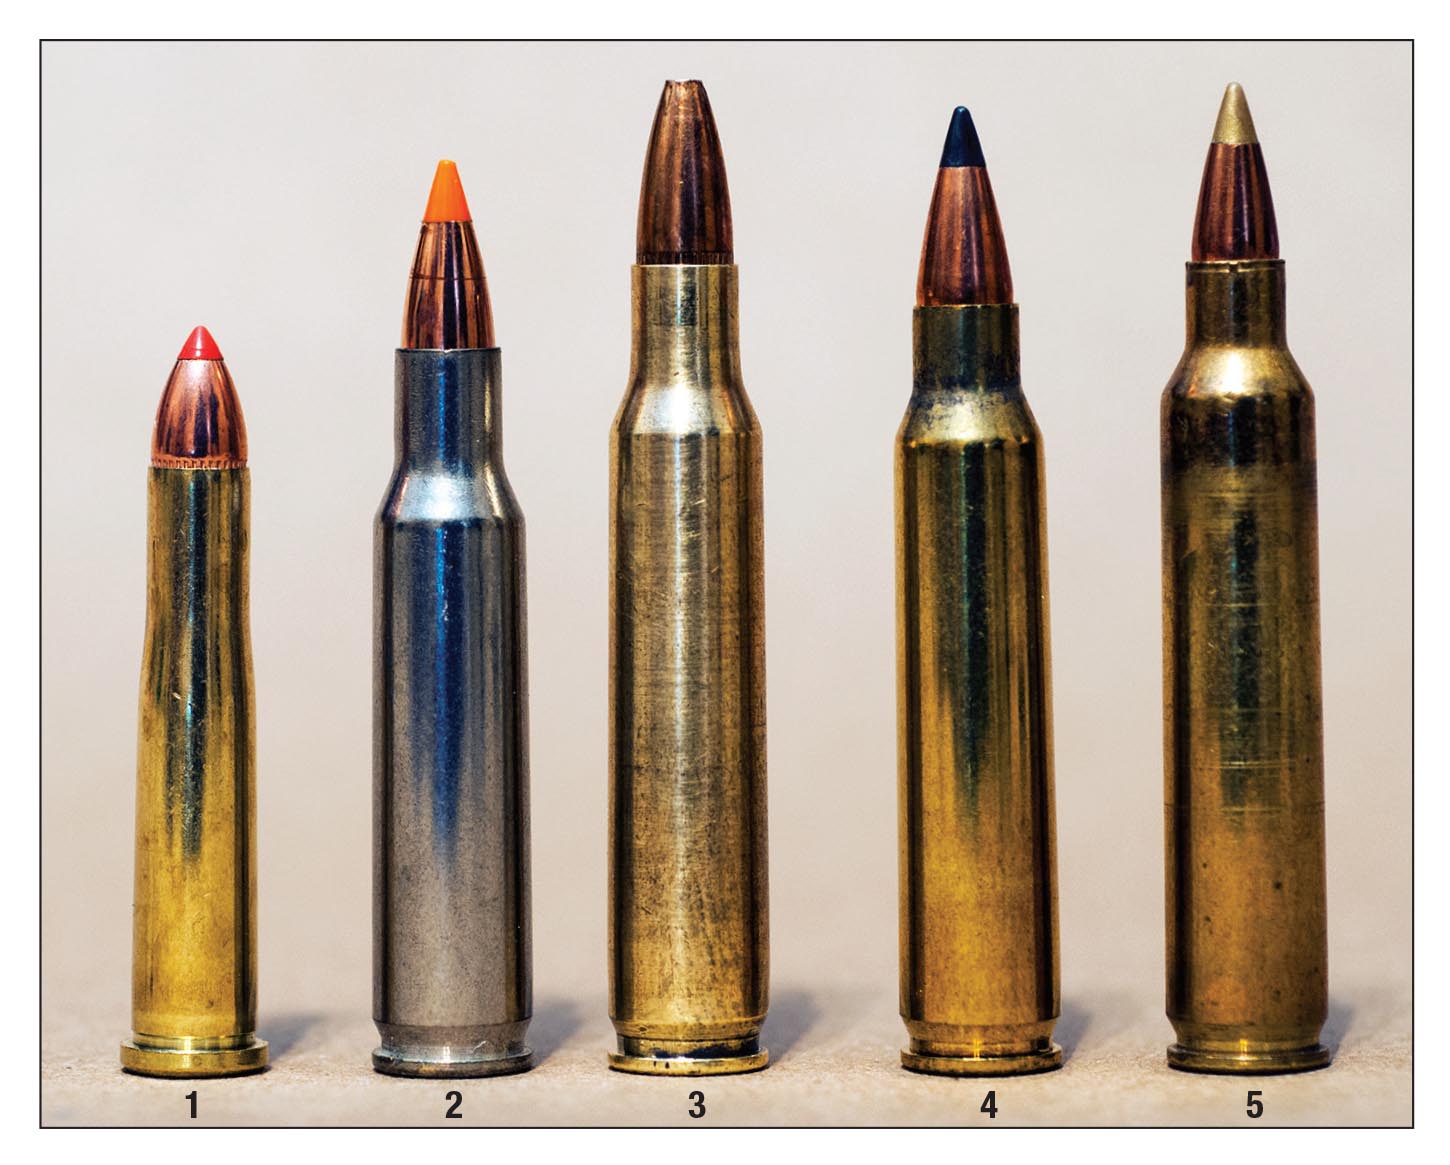 The (1) .22 Hornet was somewhat displaced by the (2) .222 Remington that was later used to create the (3) .222 Remington Magnum, (4) .223 Remington and the (5) .204 Ruger. The .222 was also the primary case design for the .17 Remington and .17 and .221 Remington Fireball cartridges. Other variations include the .25-45 Sharps, the .300 Whisper/Blackout and assorted wildcats.